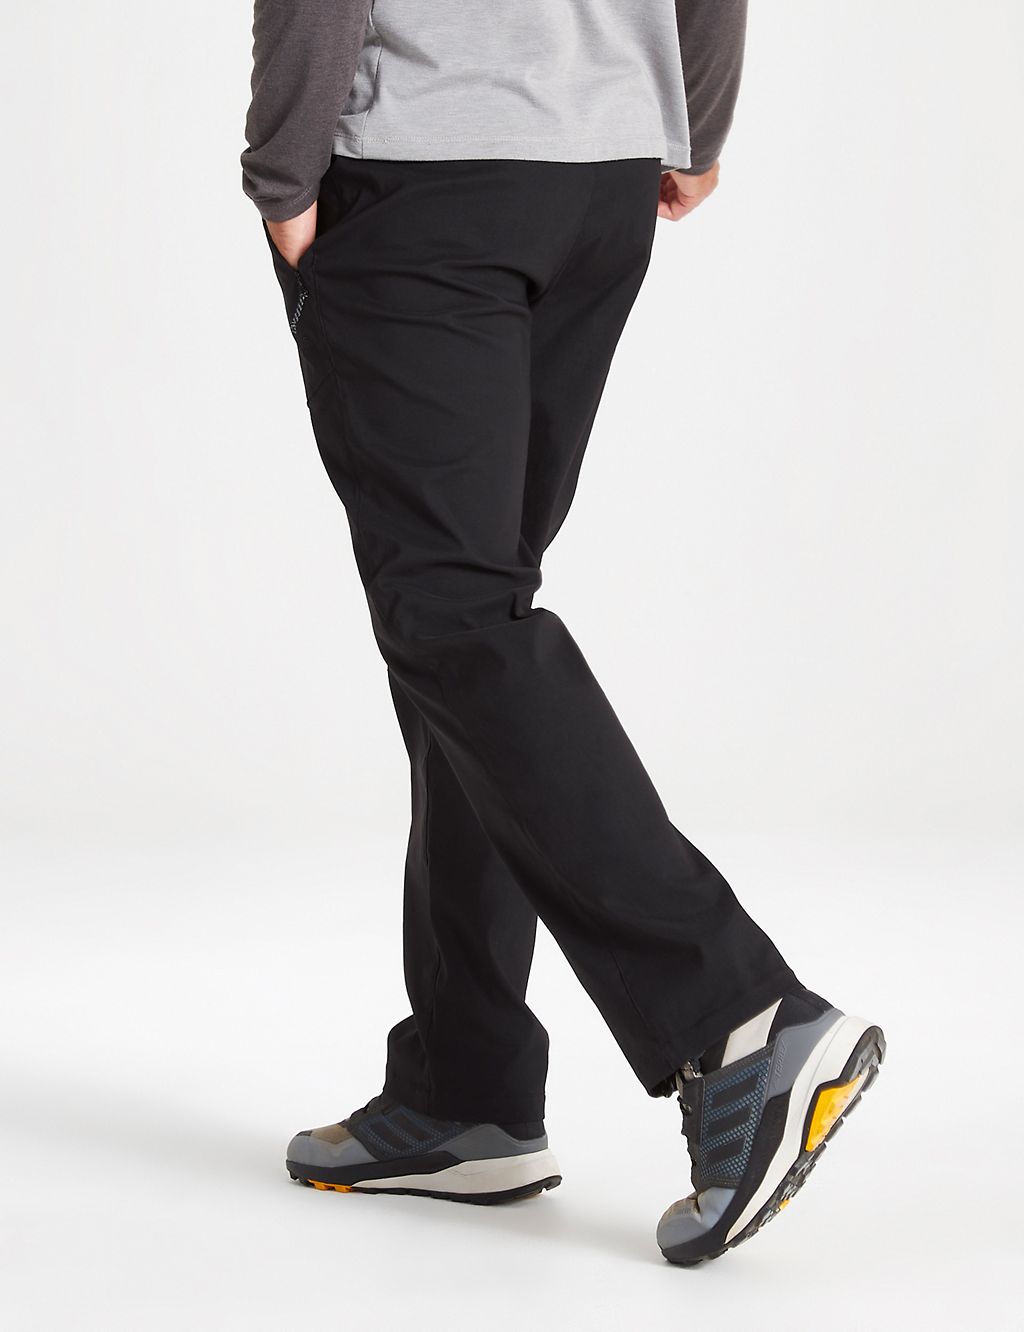 Kiwi Tailored Fit Stretch Trekking Trousers 4 of 5